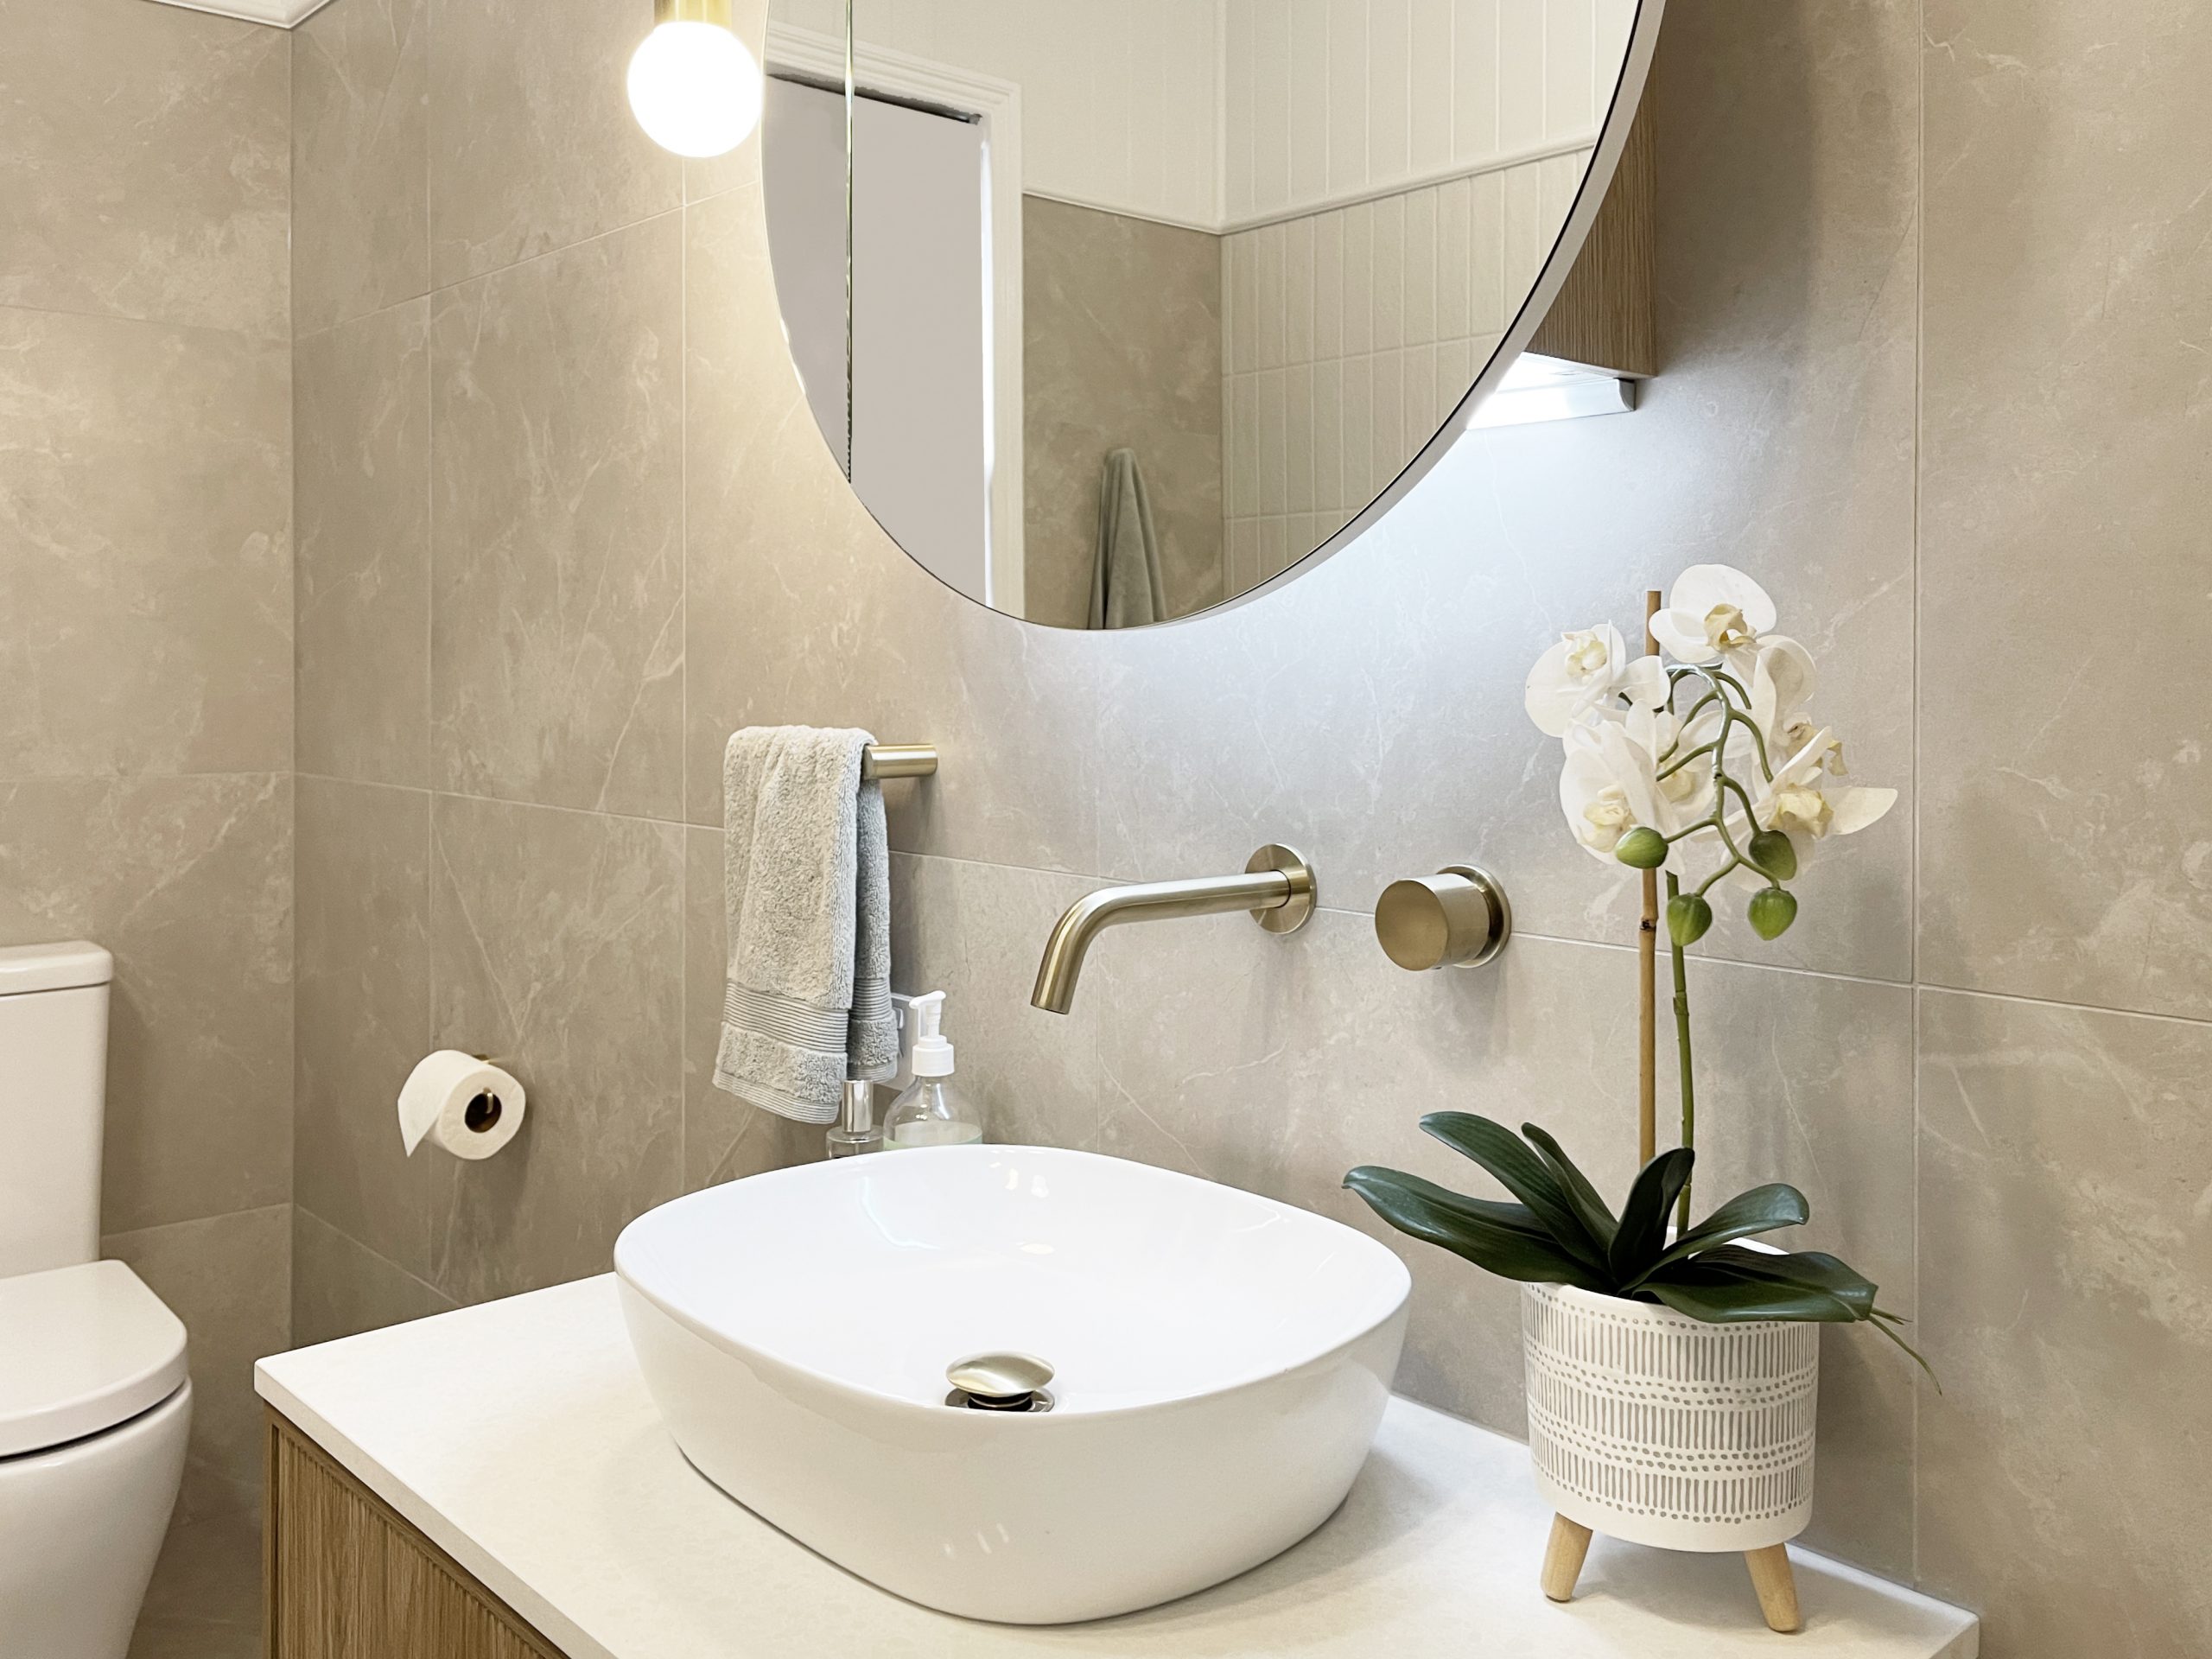 In wall Tapware with Vessel Basin and LED Shaving Cabinet